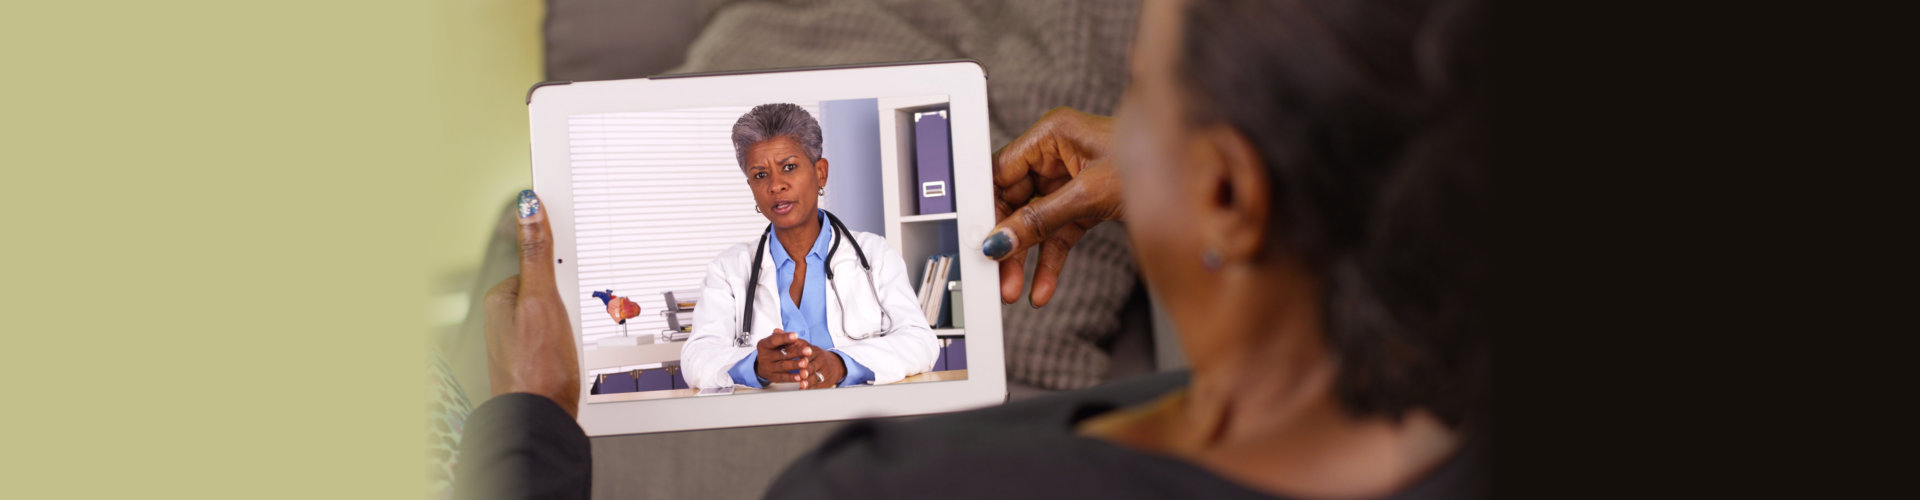 senior woman talking to a doctor on tablet